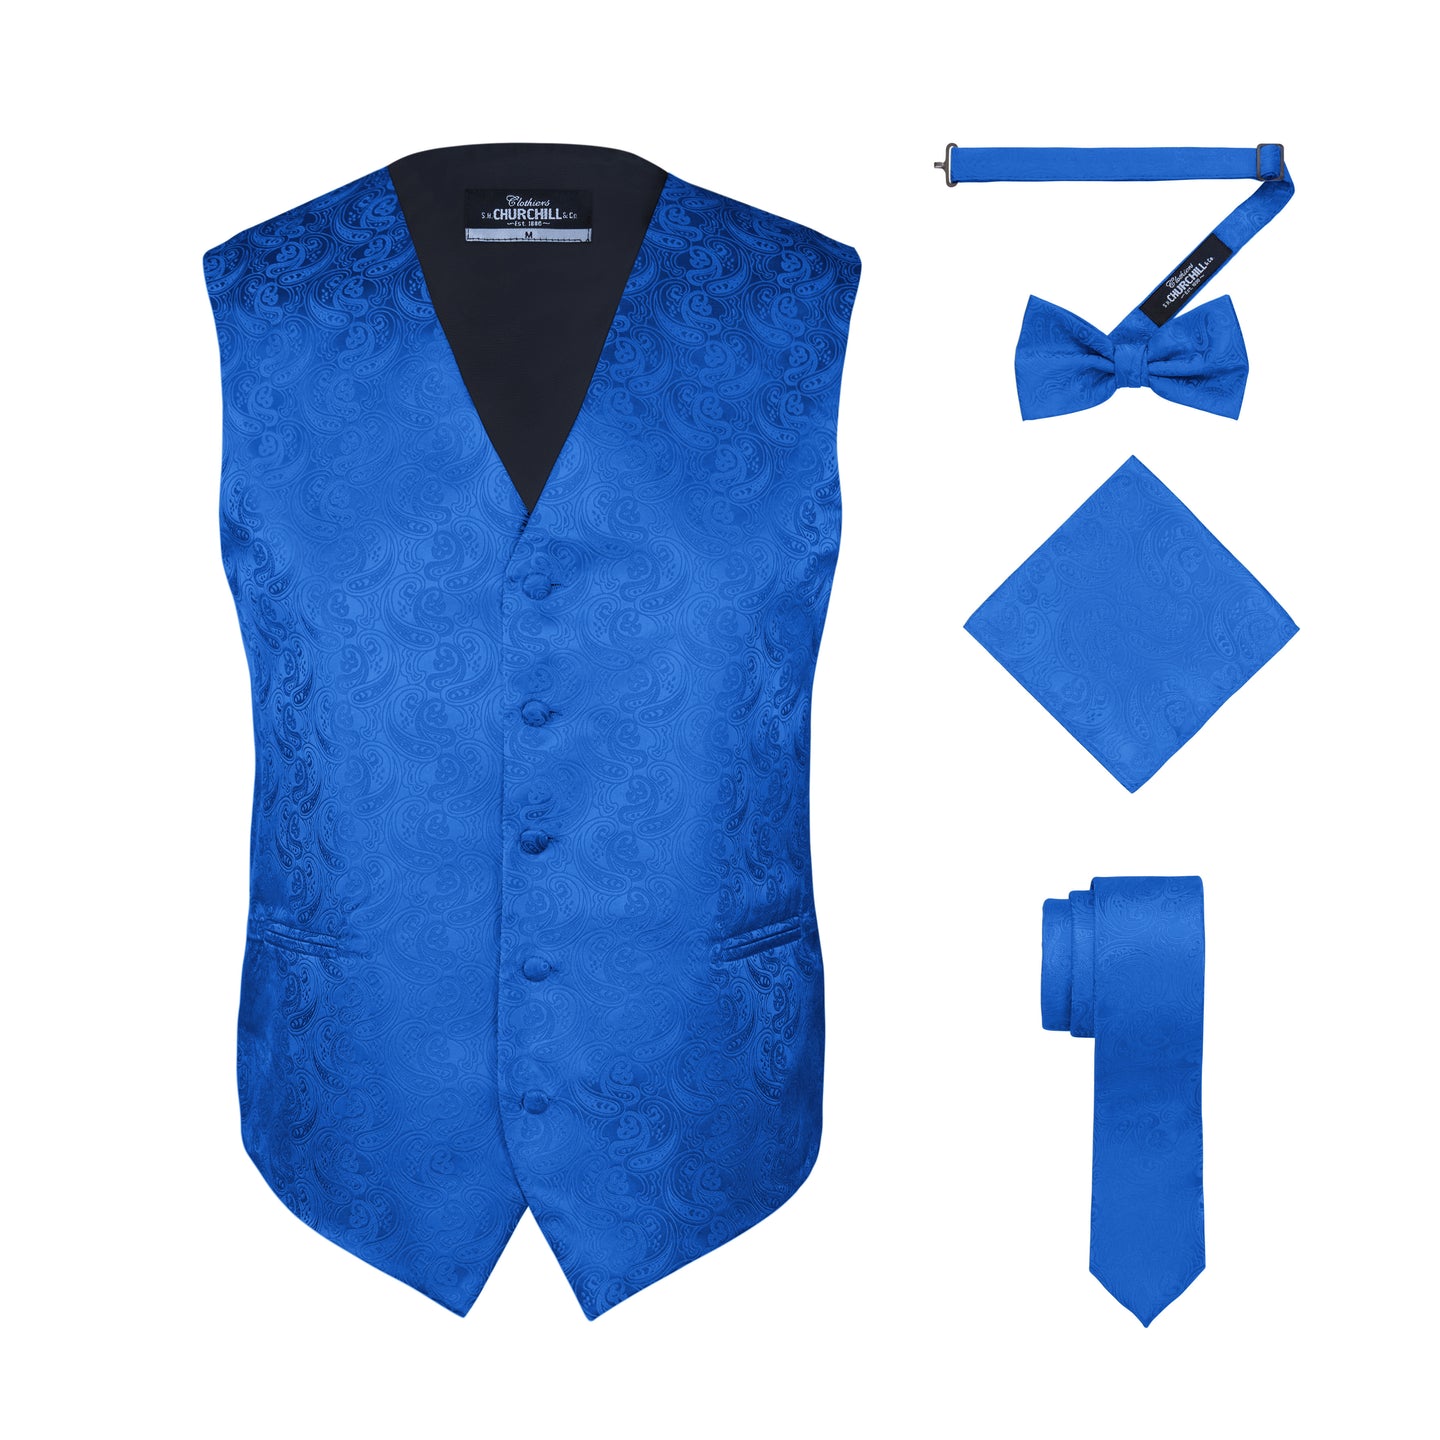 S.H. Churchill & Co. Men's Royal Blue Paisley Vest Set, with Bow Tie, Neck Tie and Pocket Hanky